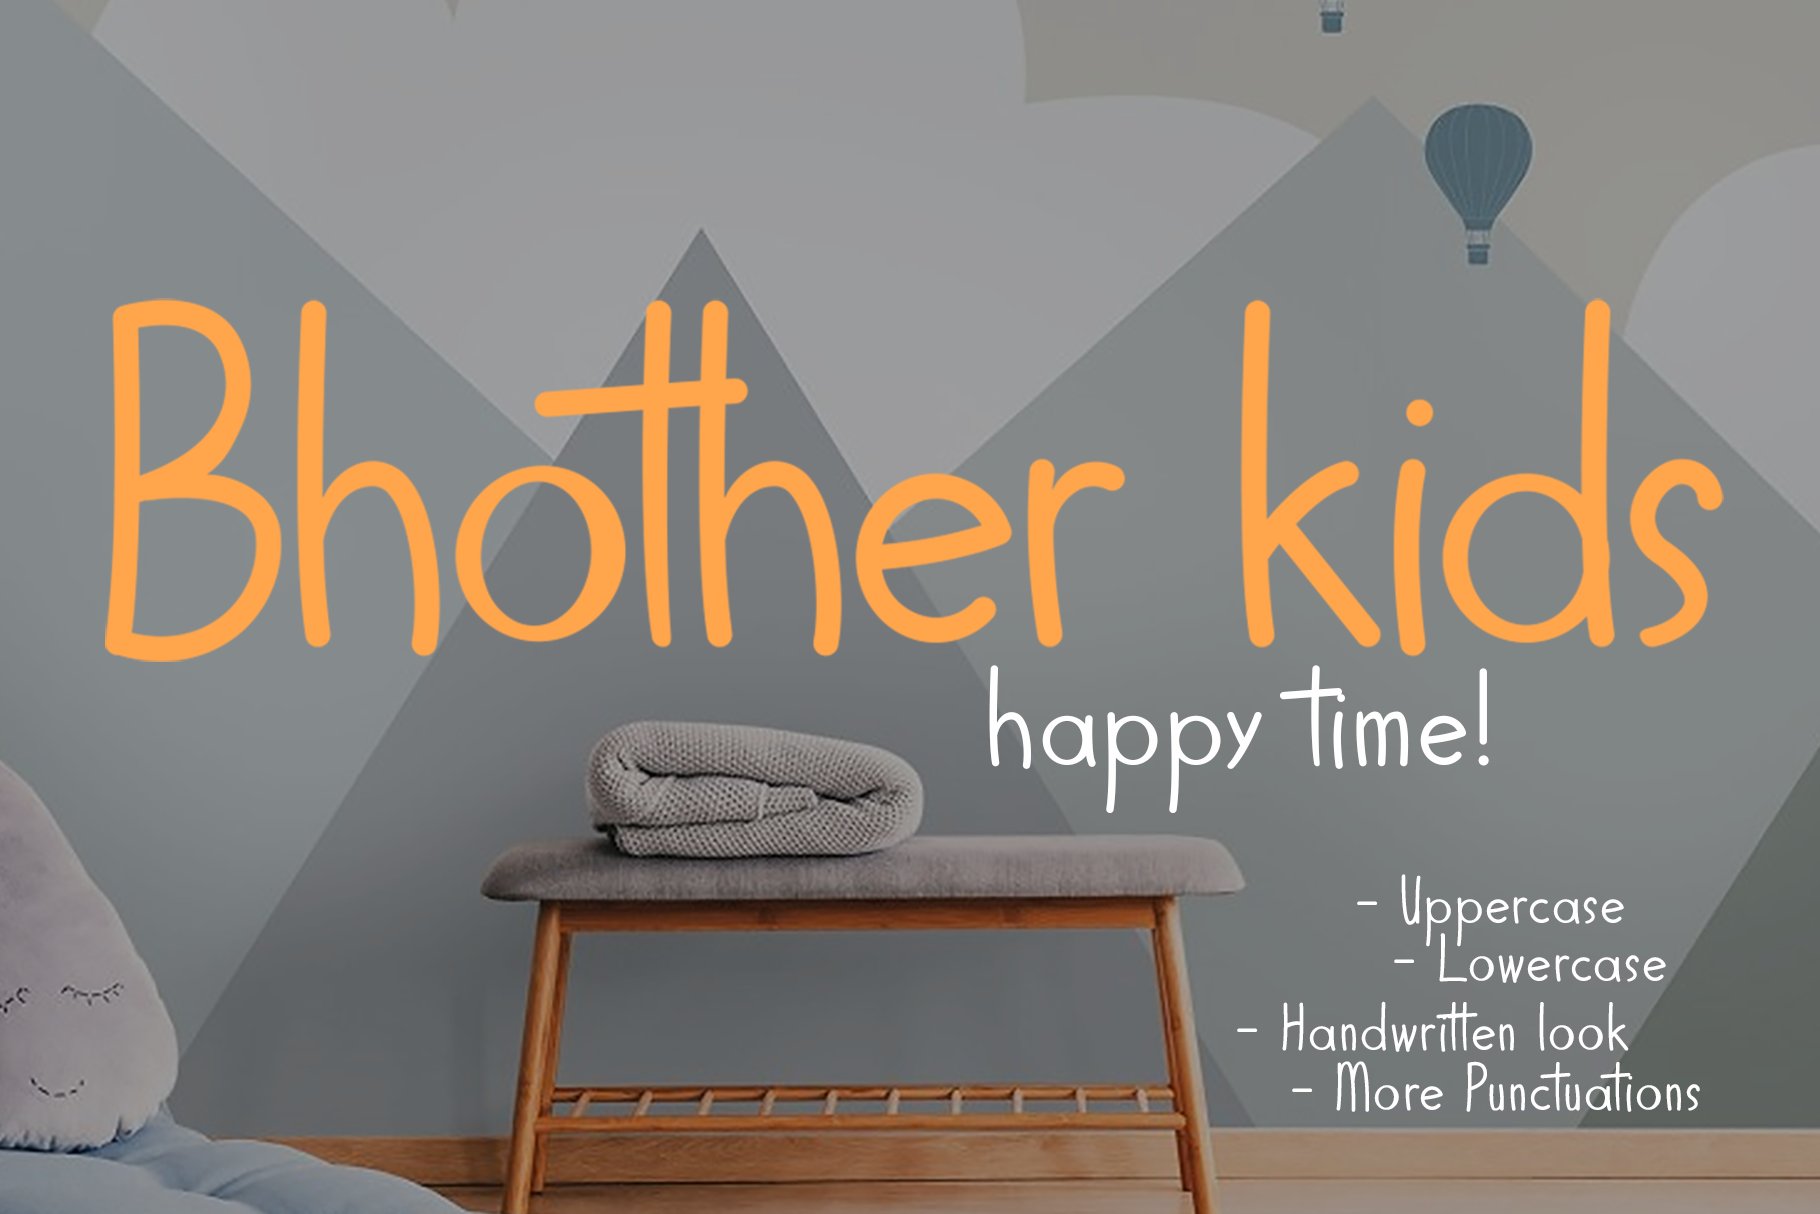 Bhother Kids- Handwritten Font cover image.